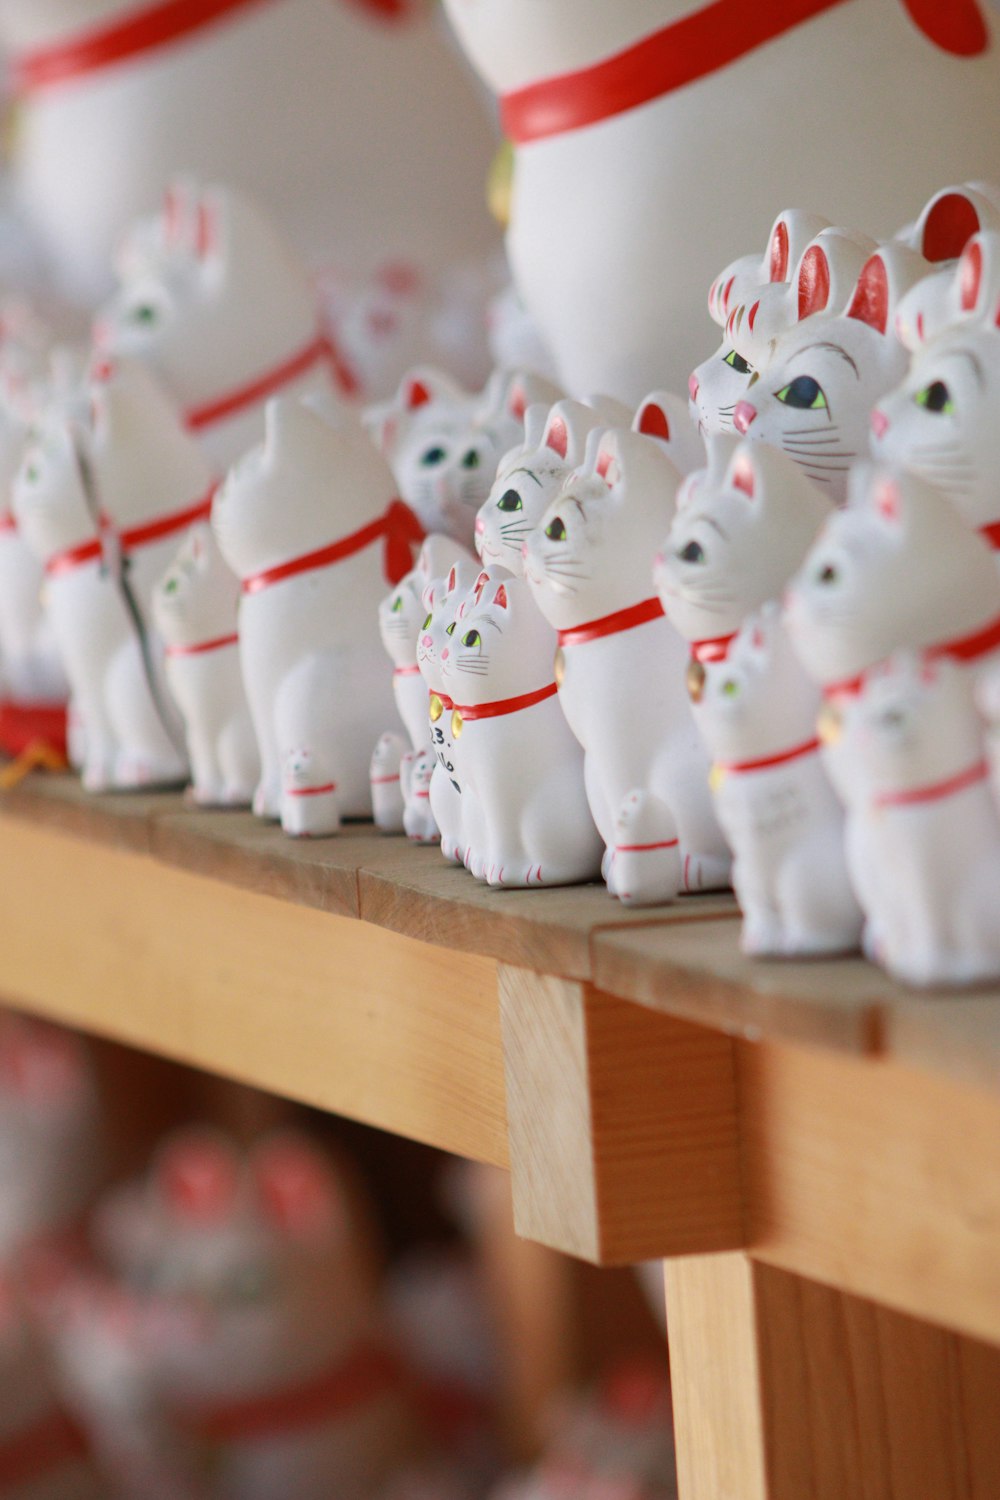 a row of white cat figurines sitting on top of a wooden table